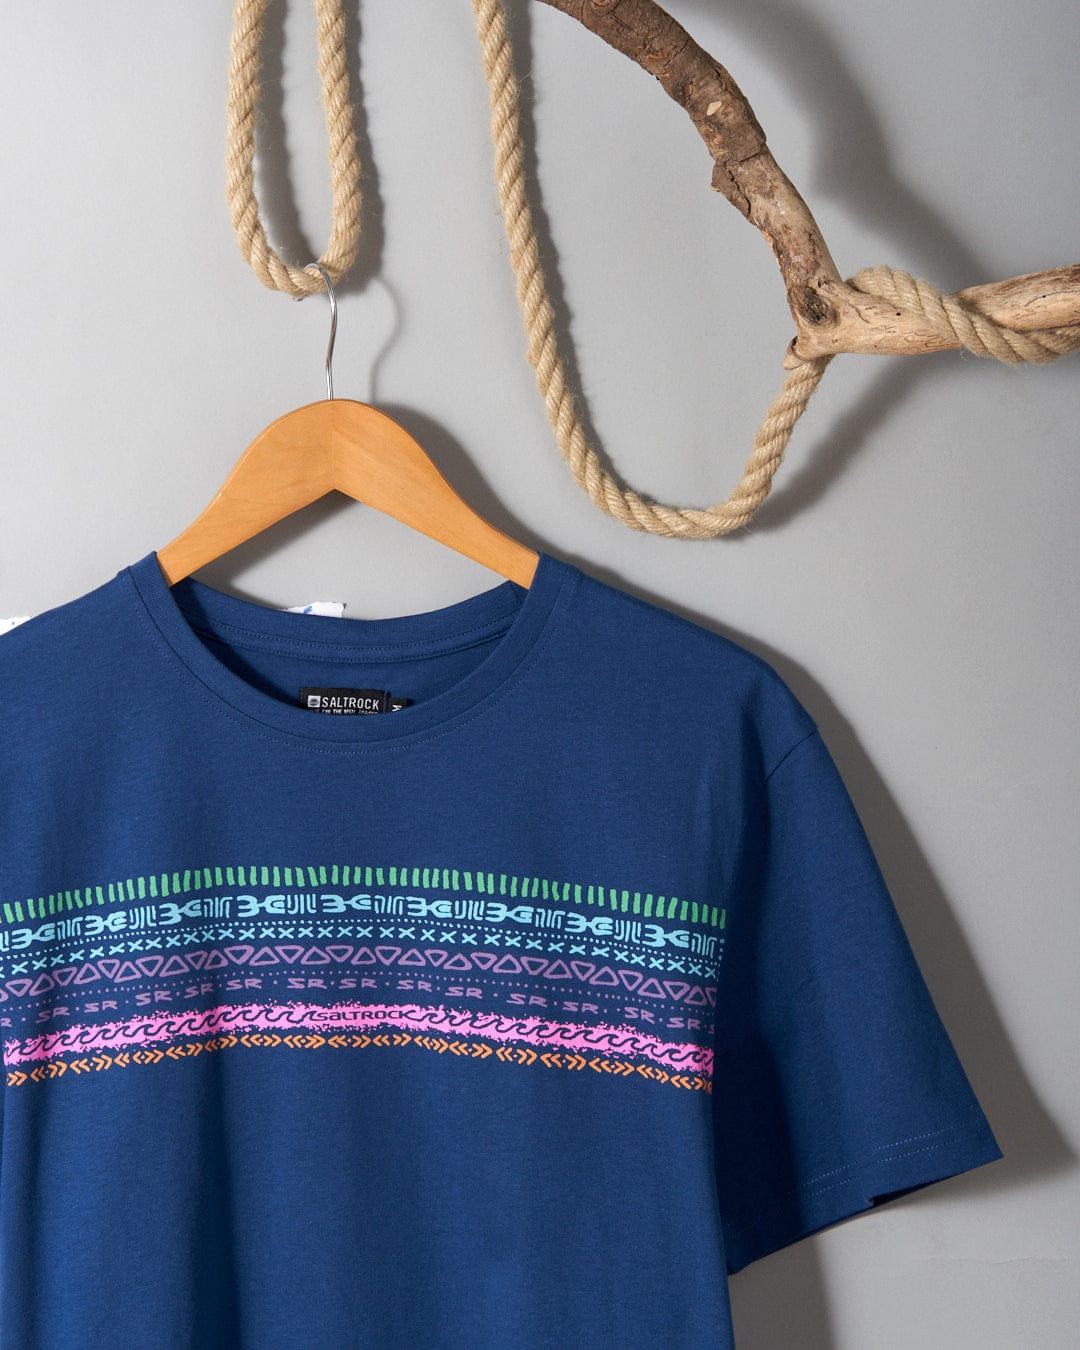 A Marks Chest - Mens Short Sleeve T-Shirt in blue cotton with colorful stripes hanging on a rope, featuring Saltrock branding.